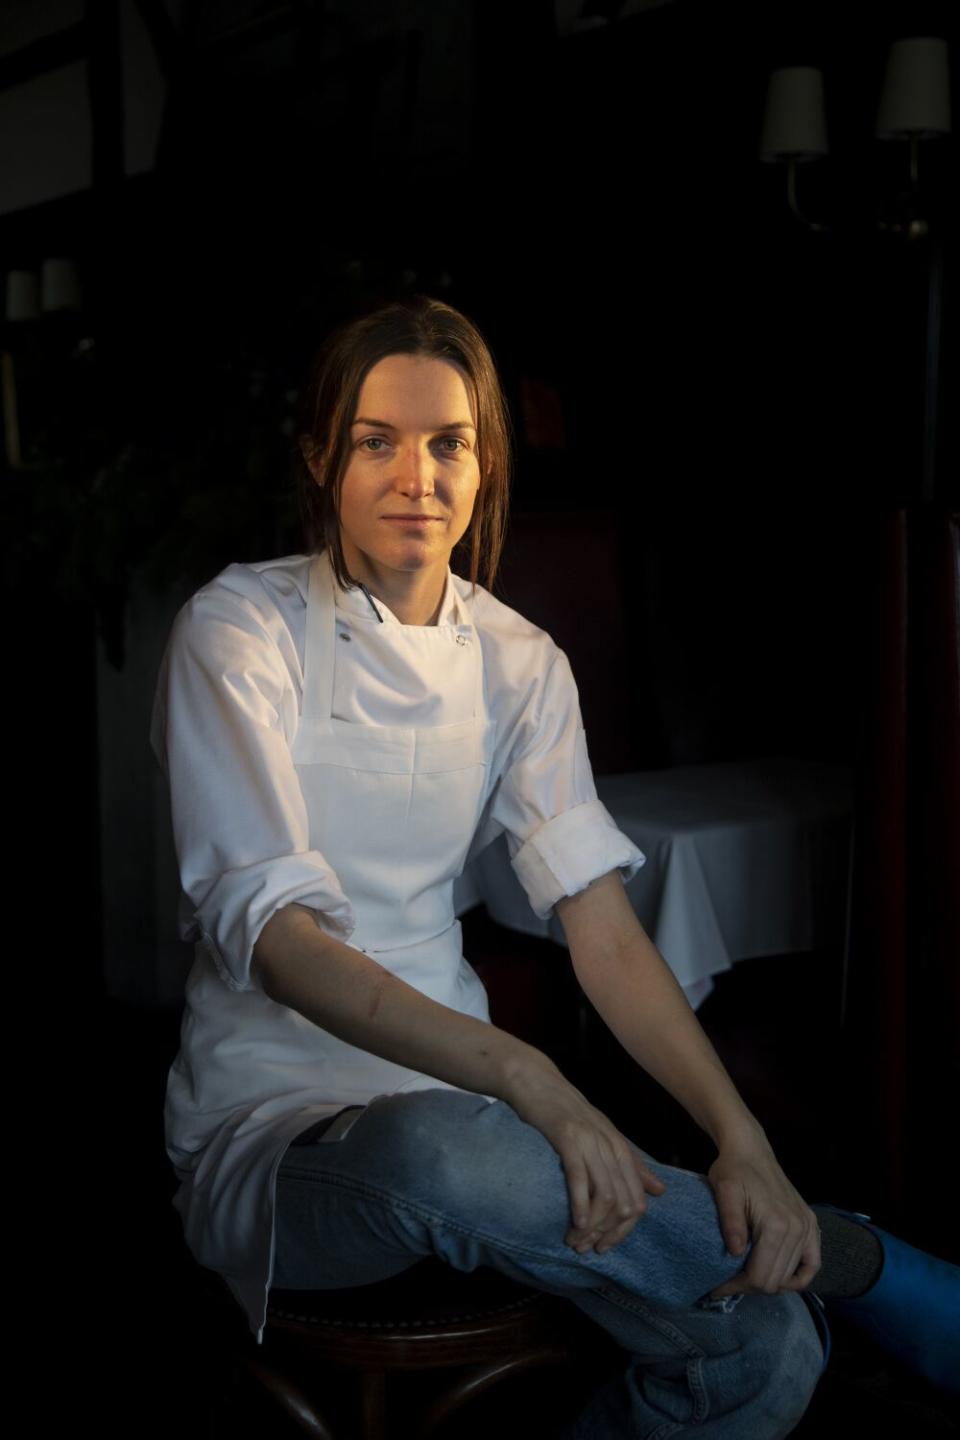 Liz Johnson is one of the chefs at Horses restaurant on December 23, 2021 in Los Angeles, California.